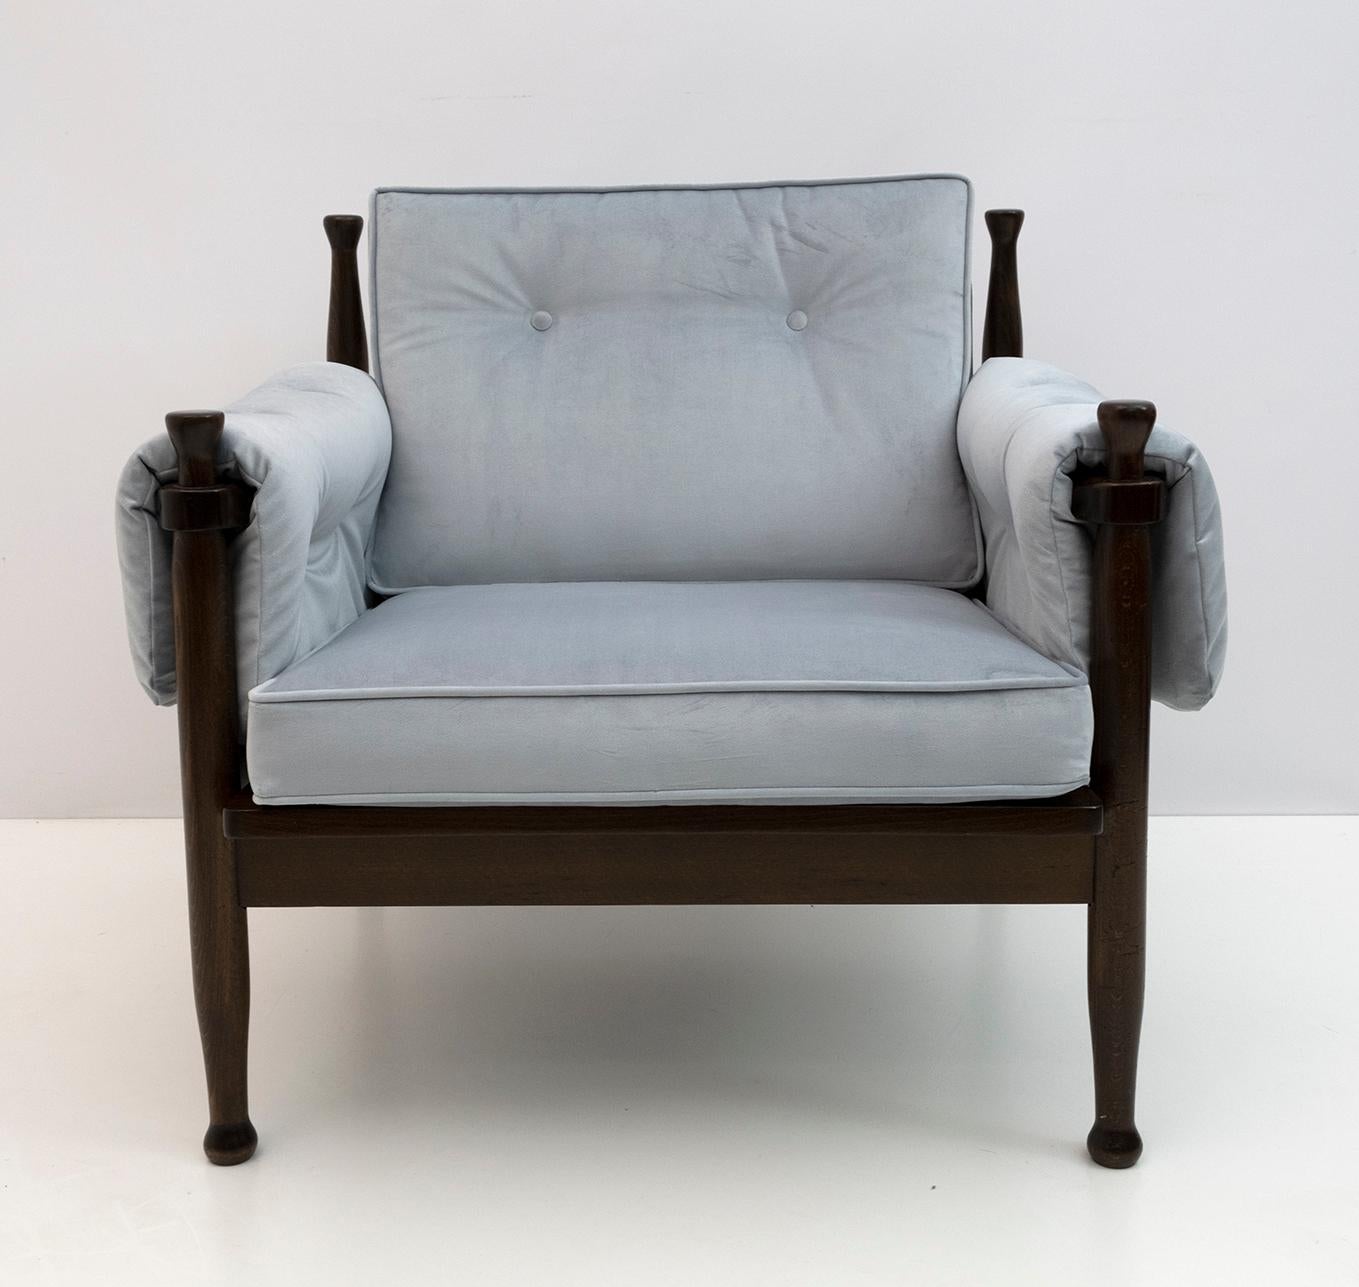 Armchair in walnut-stained beech, in the style of Eric Merthen, Sweden in the 1960s, the armchair has been restored and re-upholstered in light blue velvet.